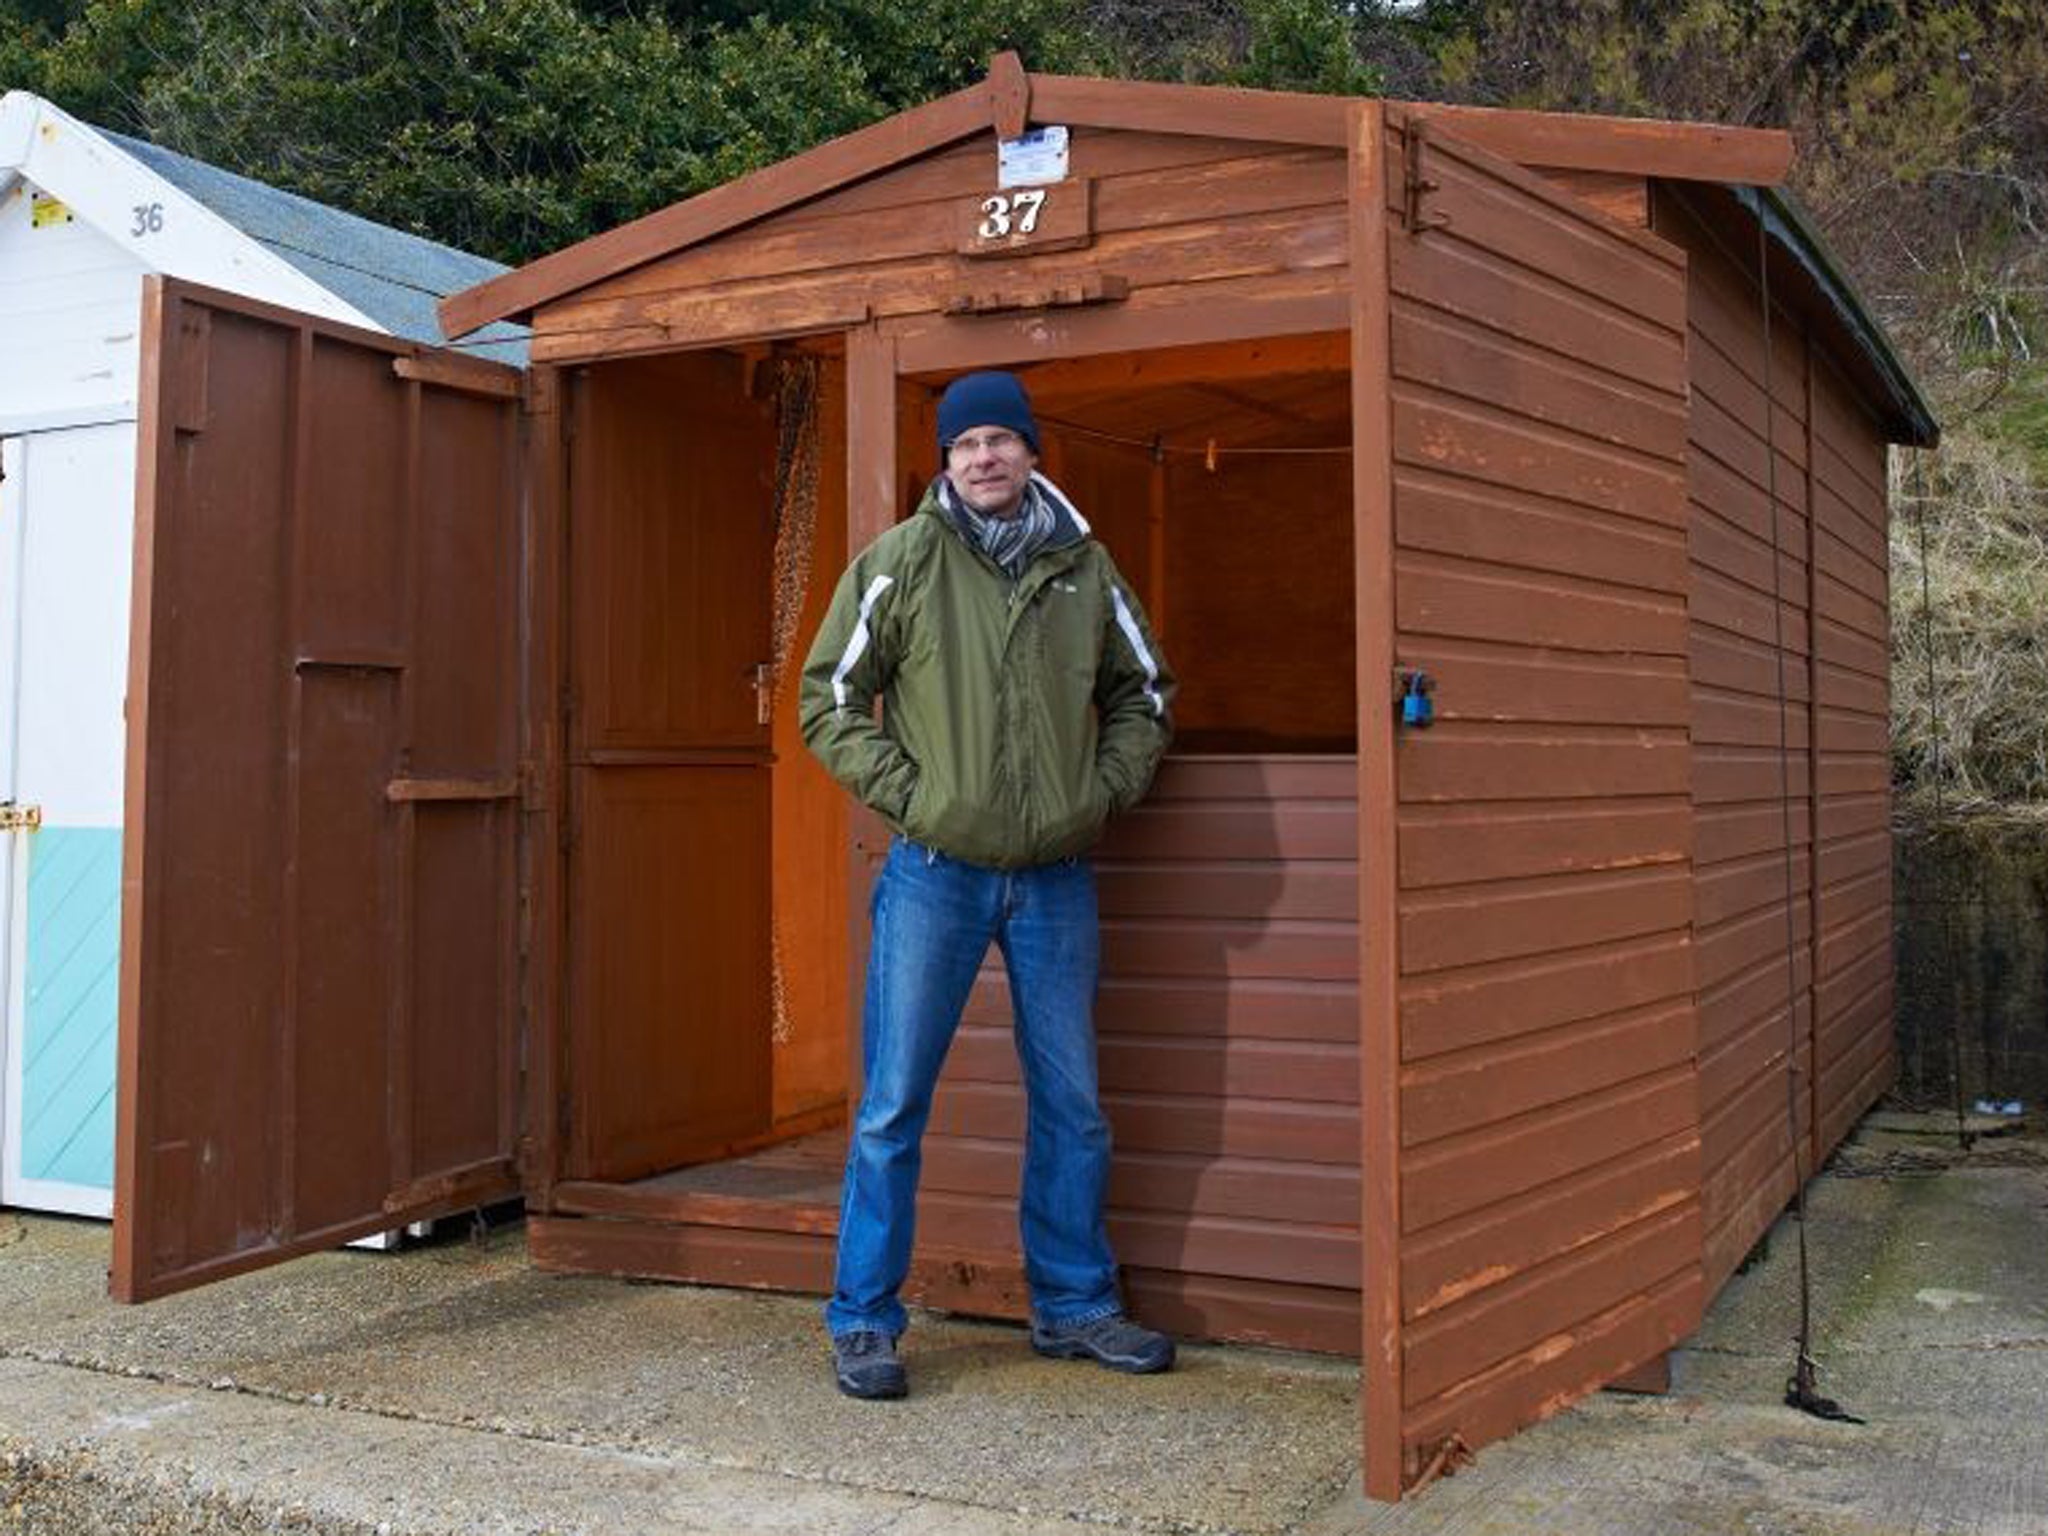 Murray Dellow has been trying to sell his beach hut at Holland-on-Sea since summer 2010